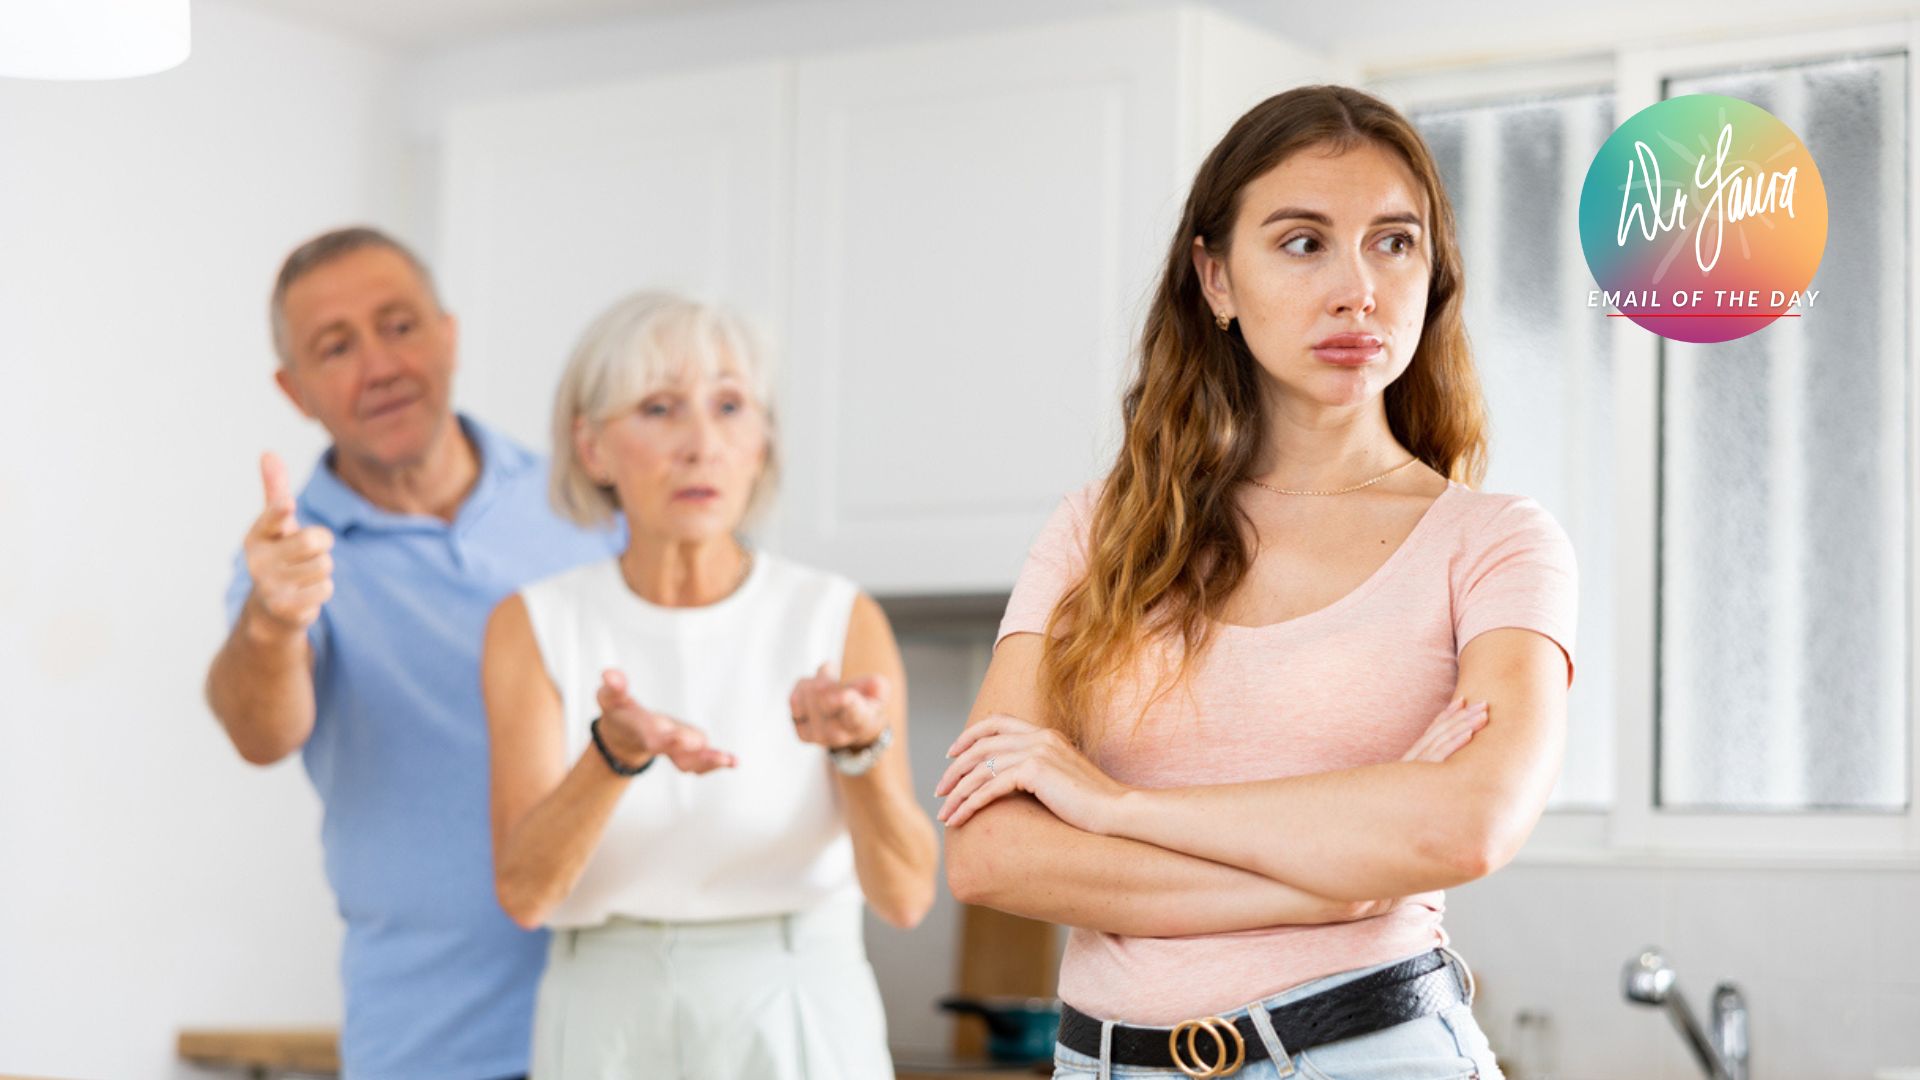 Young woman crosses her arms while looking away from older woman and older man behind her, both talking to her